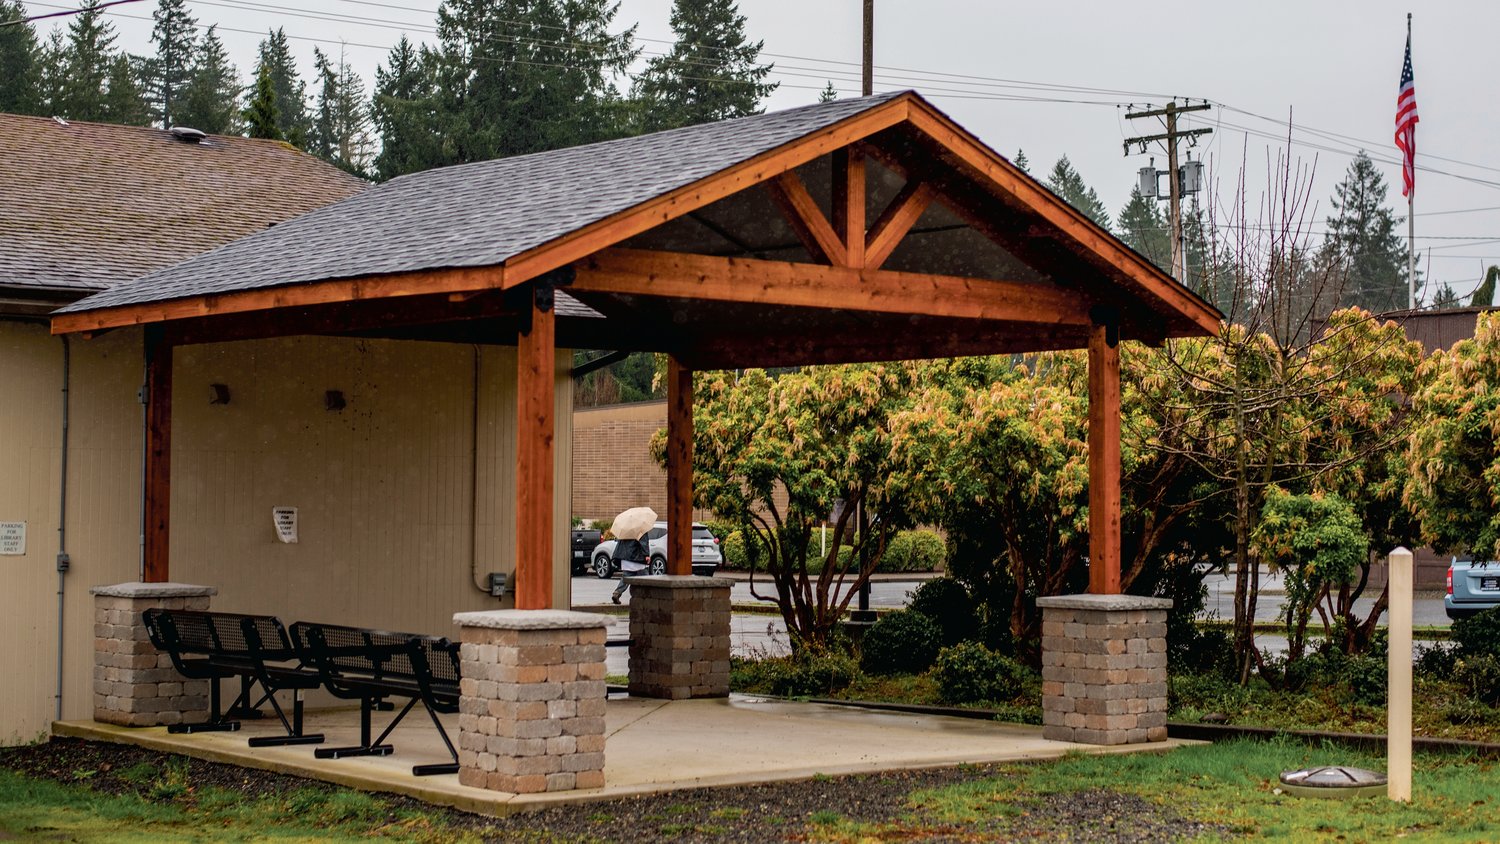 A man walks away with an umbrella in hand after stopping under a newly constructed pergola outside the Tenino Timberland Library to get out of the rain on Monday. In 2021, the city received a $26,414 grant to pave the city-owned parking lot behind the Sandstone Café, but because of the increasing costs of construction and product delays, the district switched the grant to build a visitor and community outdoor covered space next to the Tenino Timberland Library for those who visit the Tenino Farmers Market and visitors on the Yelm-Rainier-Tenino Trail to do things like read and eat lunch in.